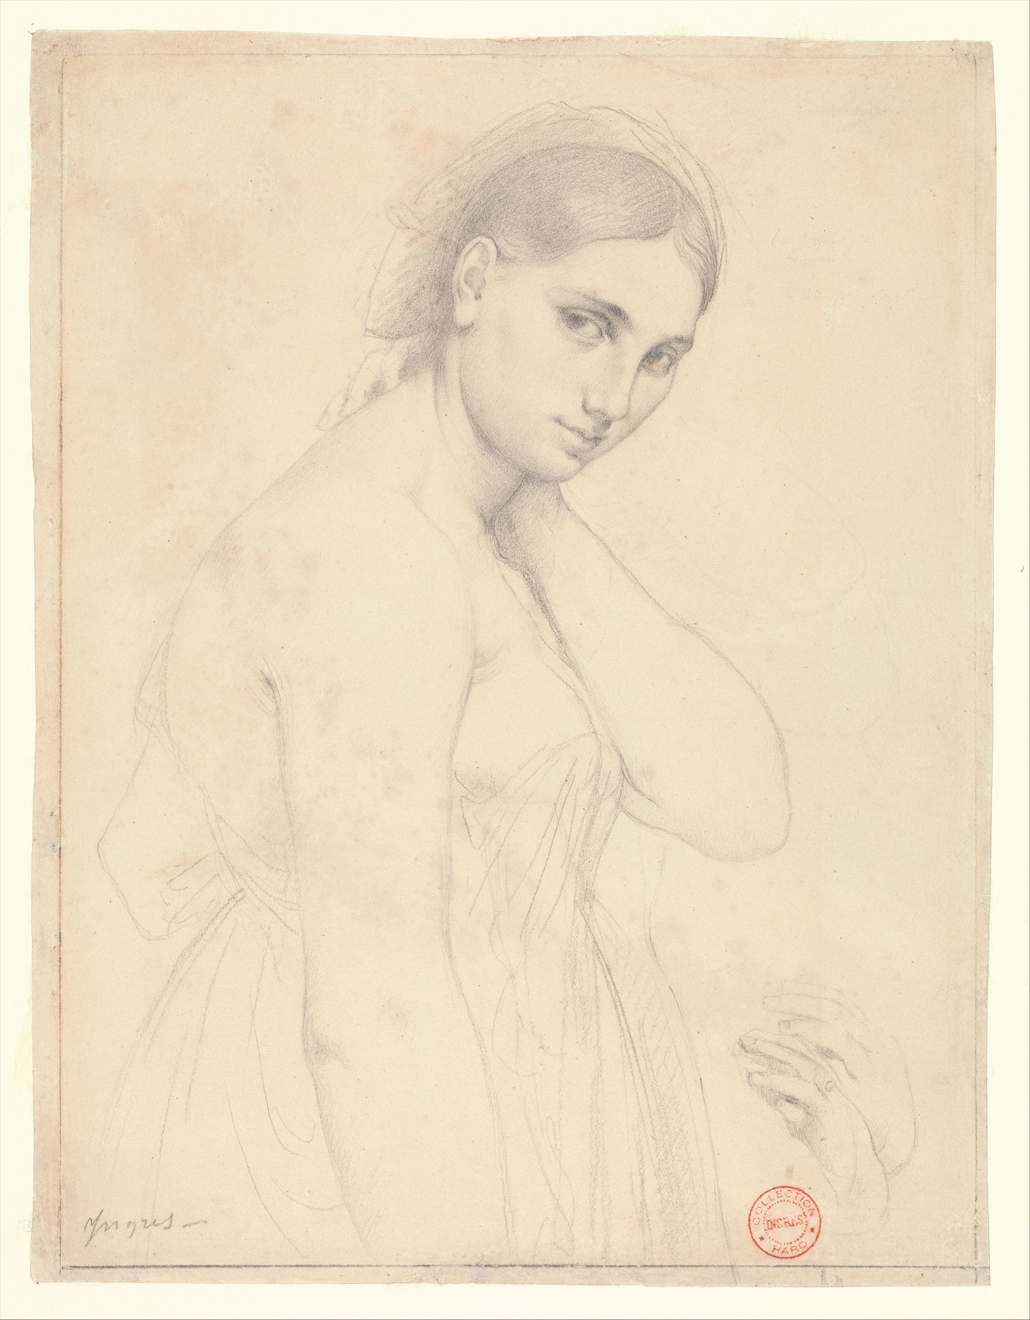 Jean Auguste Dominique Ingres (French, Montauban 1780-1867 Paris), Study for "Raphael and the Fornarina"(?), ca. 1814(?), graphite on white wove paper. The Metropolitan Museum of Art, Robert Lehman Collection, 1975